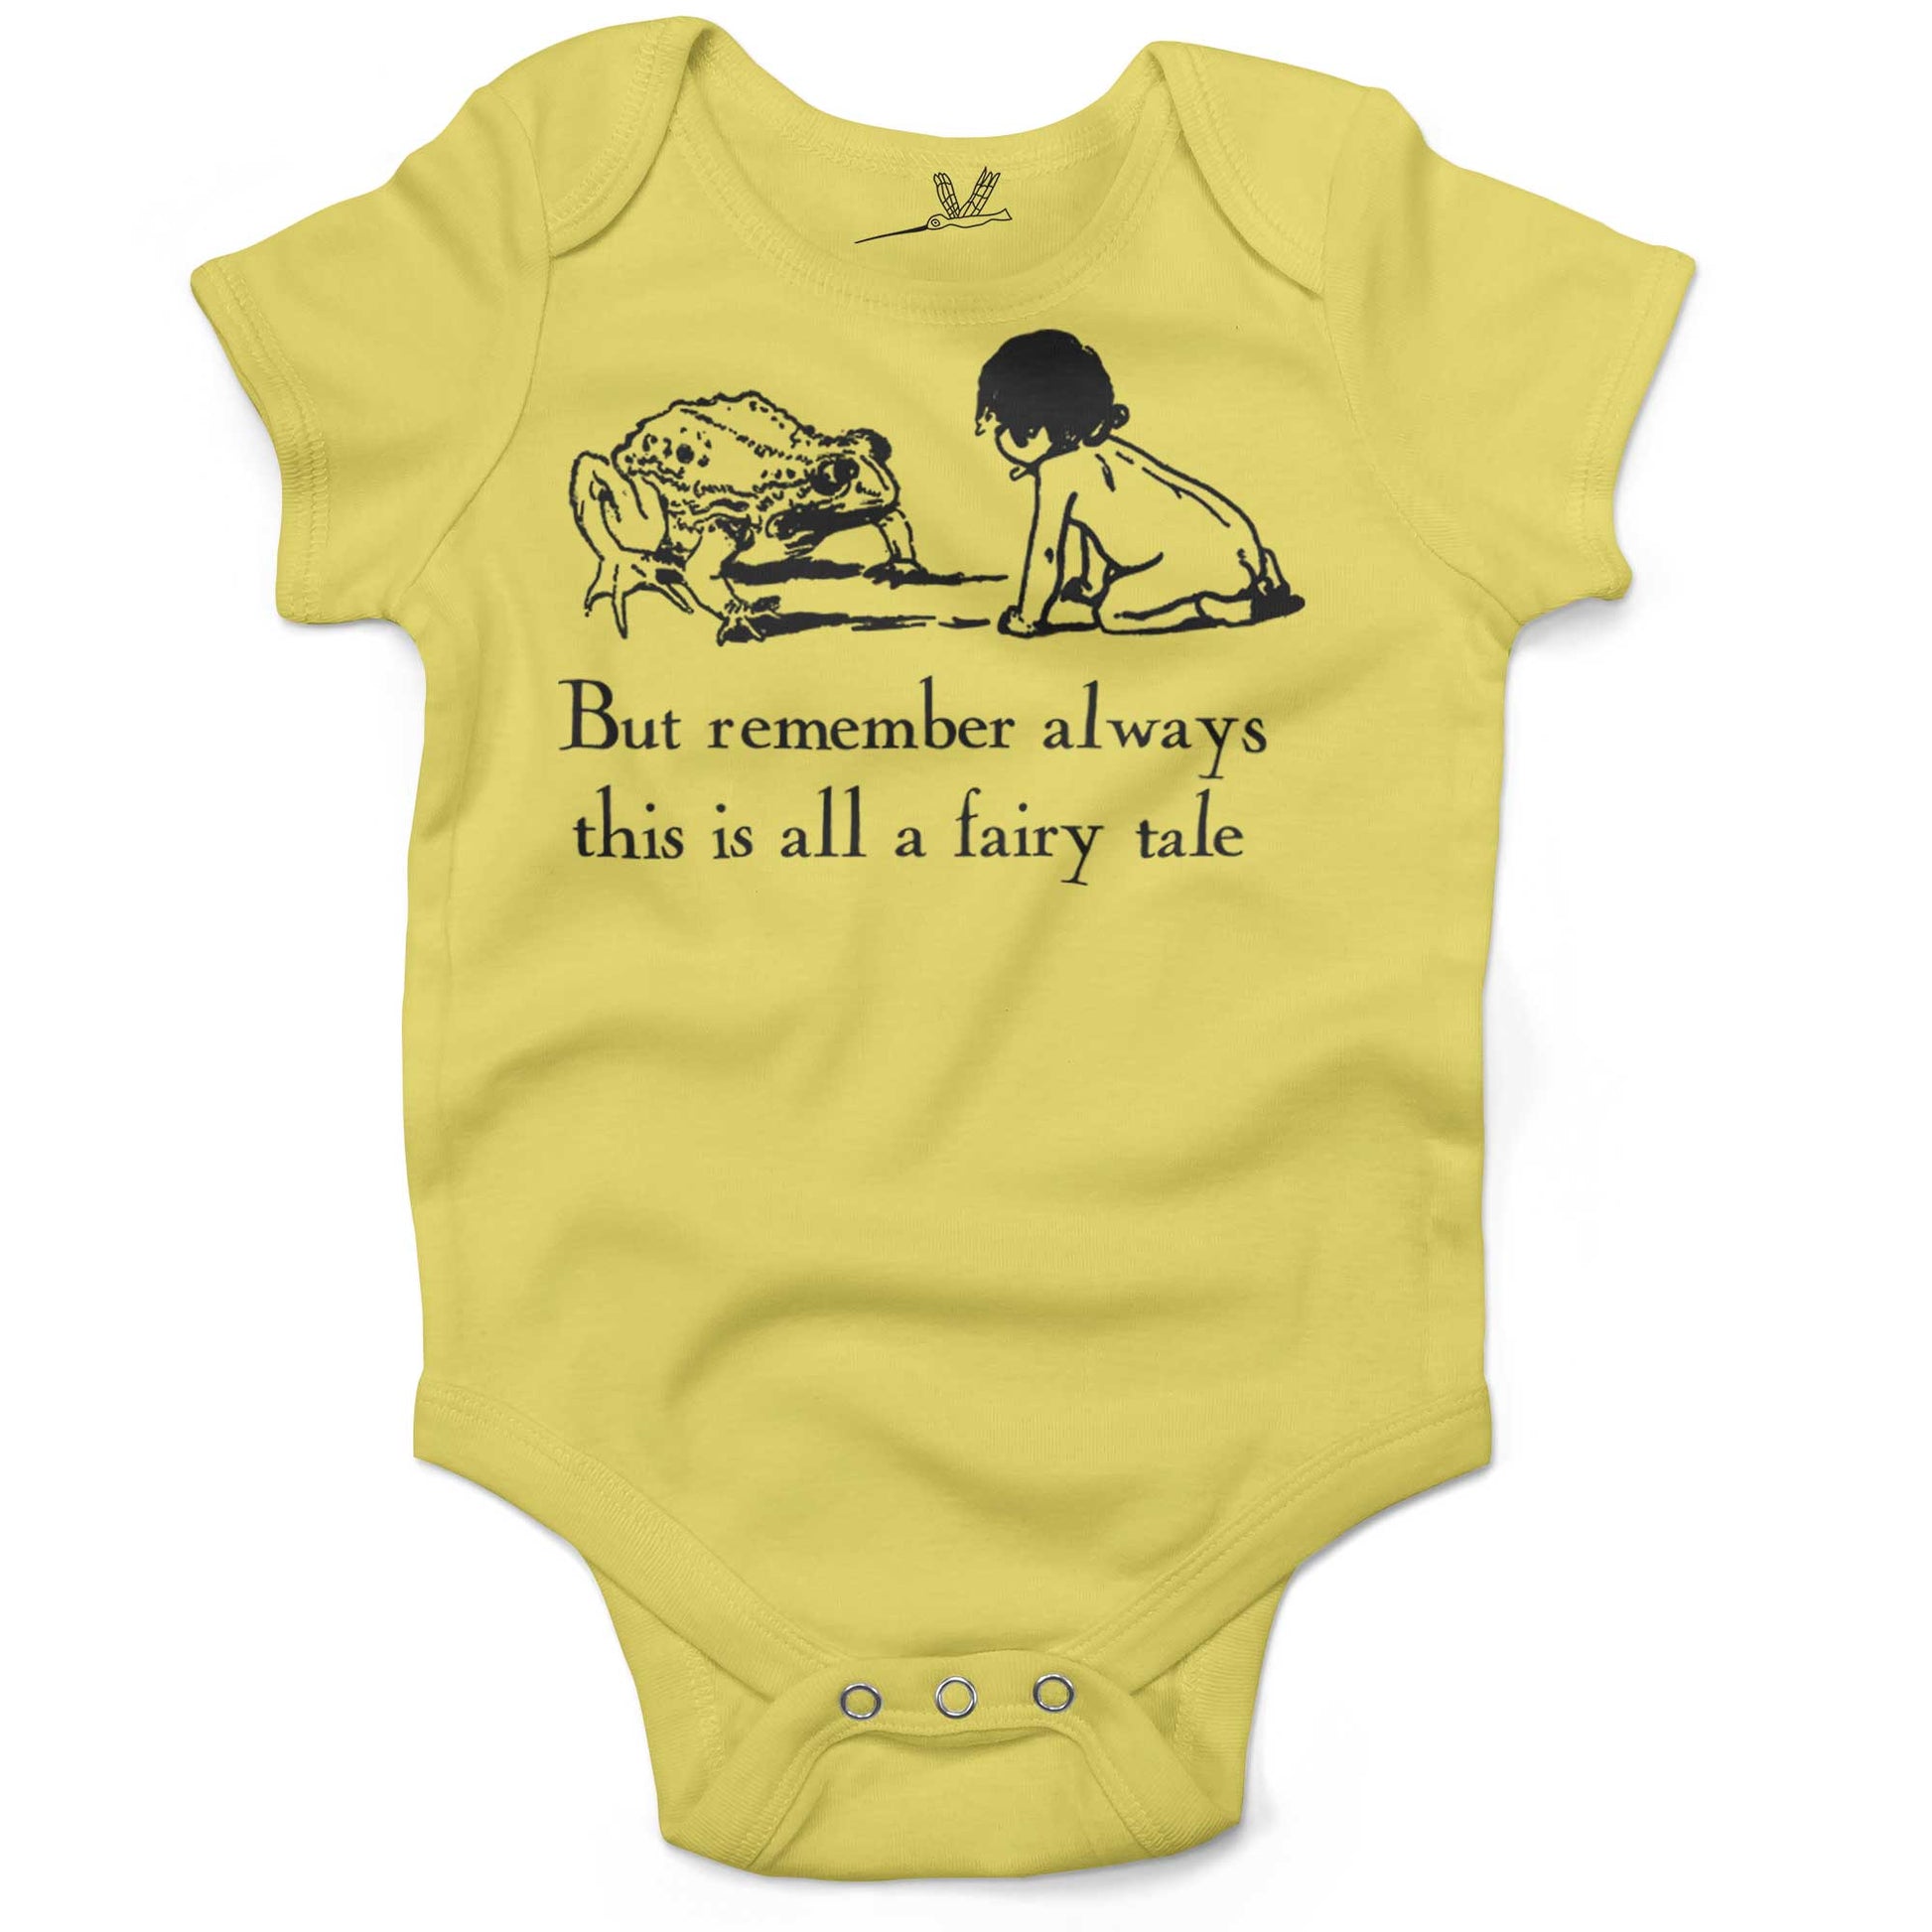 But Remember, This Is All A Fairy Tale Infant Bodysuit or Raglan Tee-Yellow-3-6 months